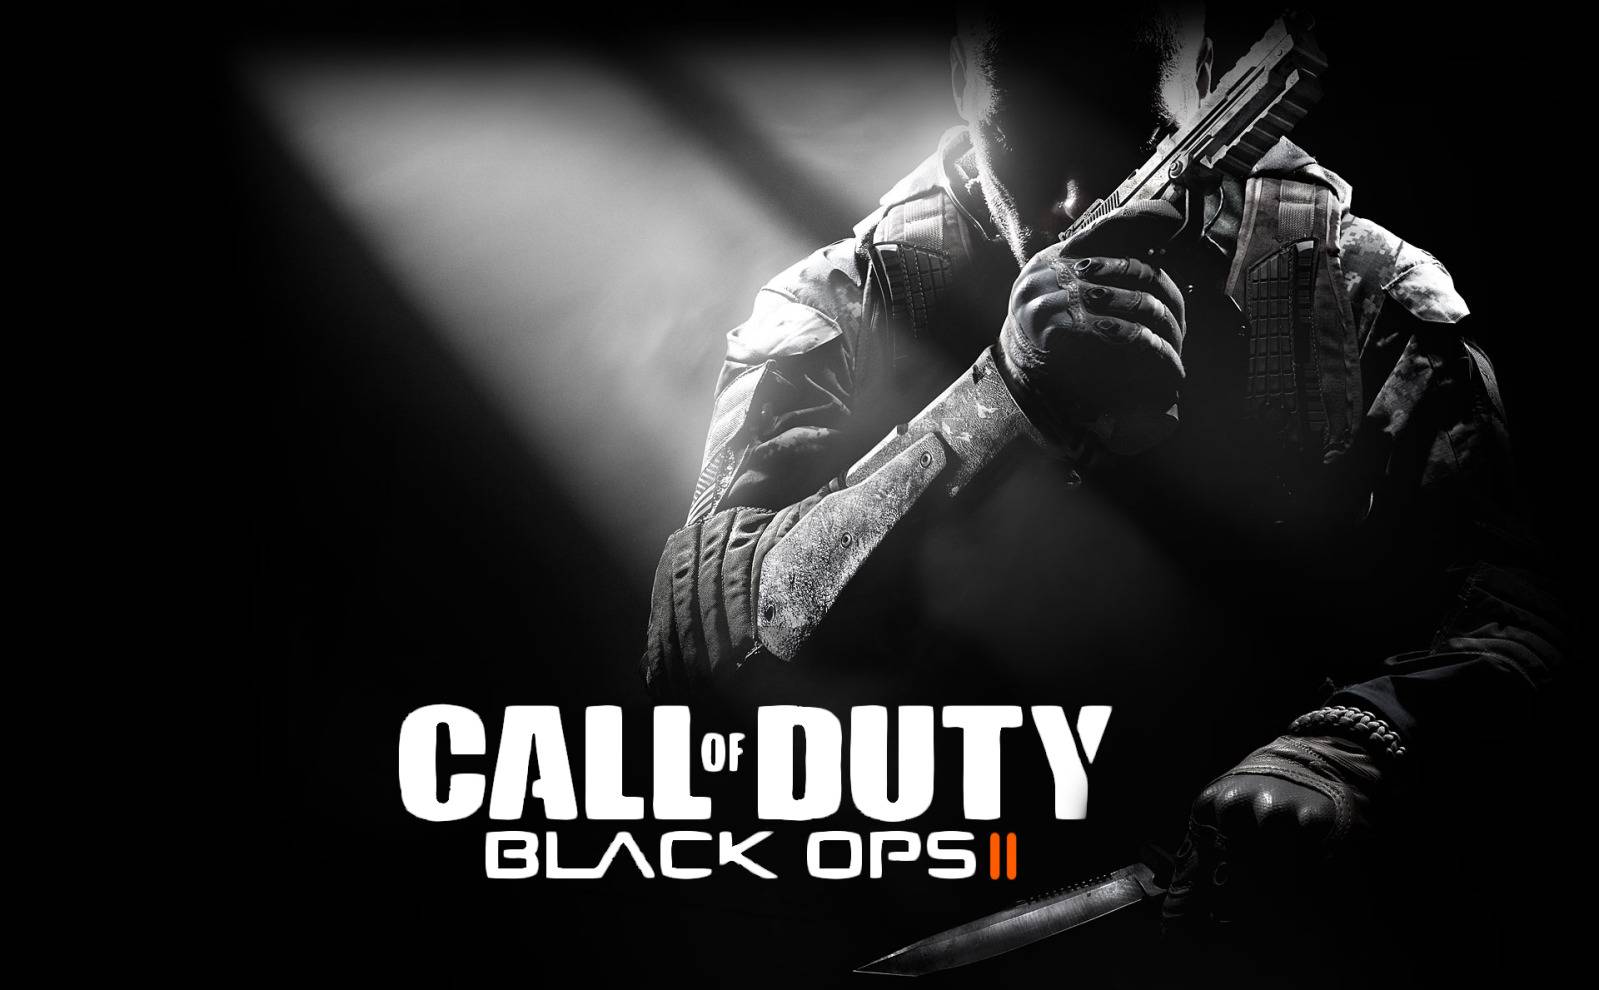 Call Of Duty Black Ops Wallpapers in HD GamingBoltcom Video